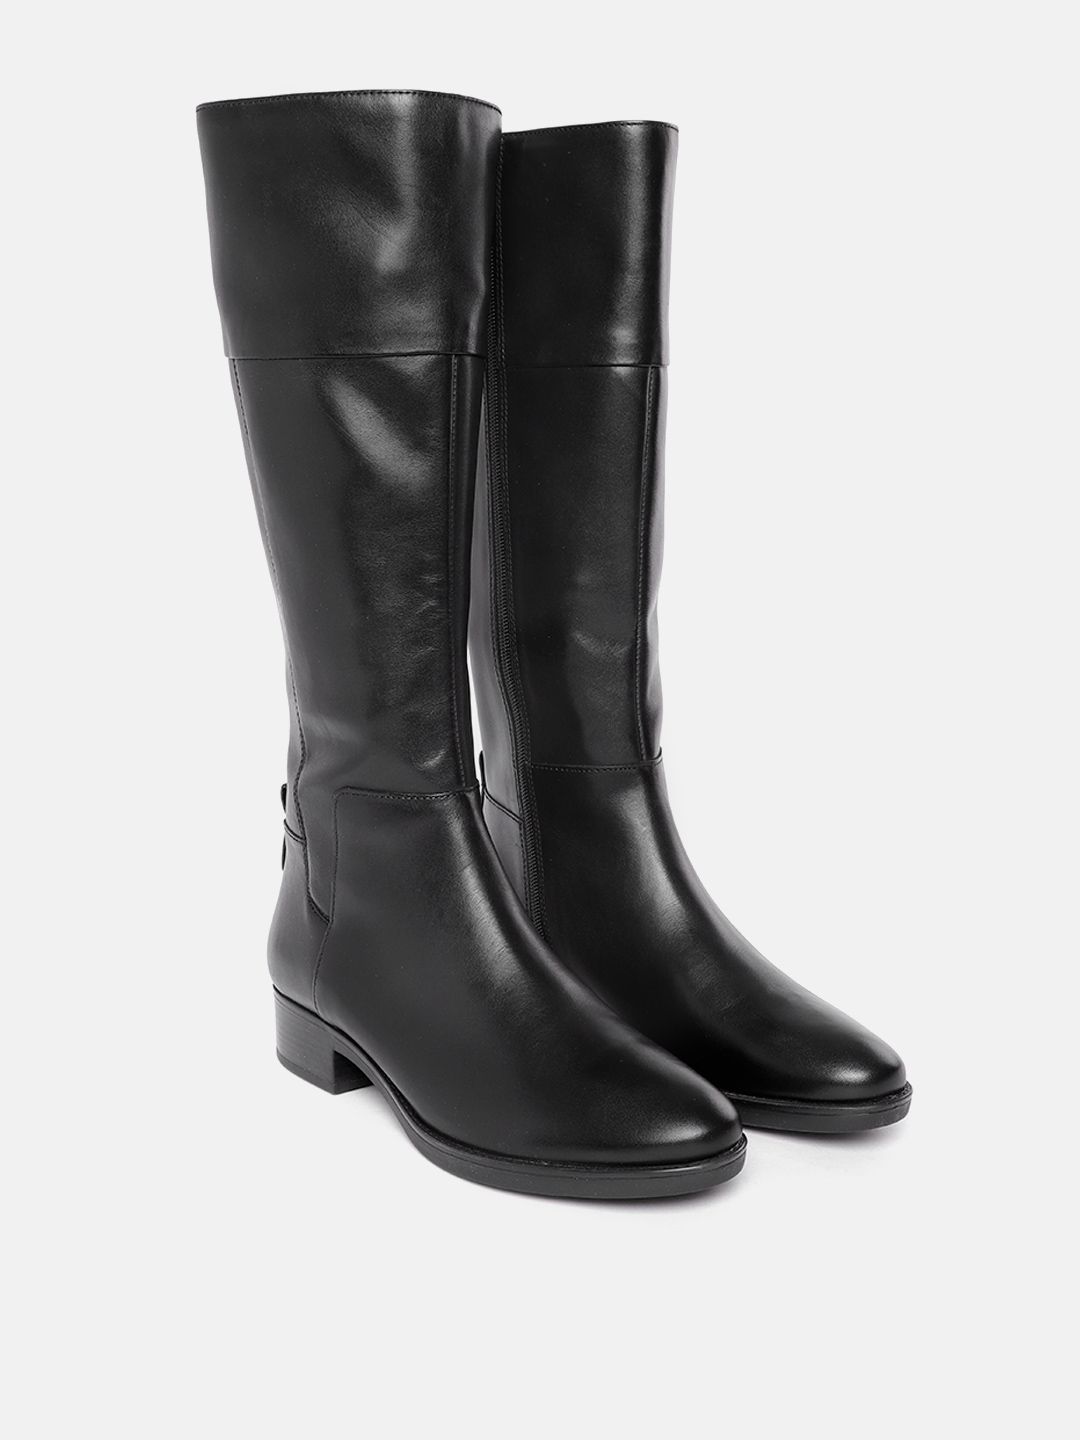 Geox Black Leather Comfort Heeled Boots Price in India